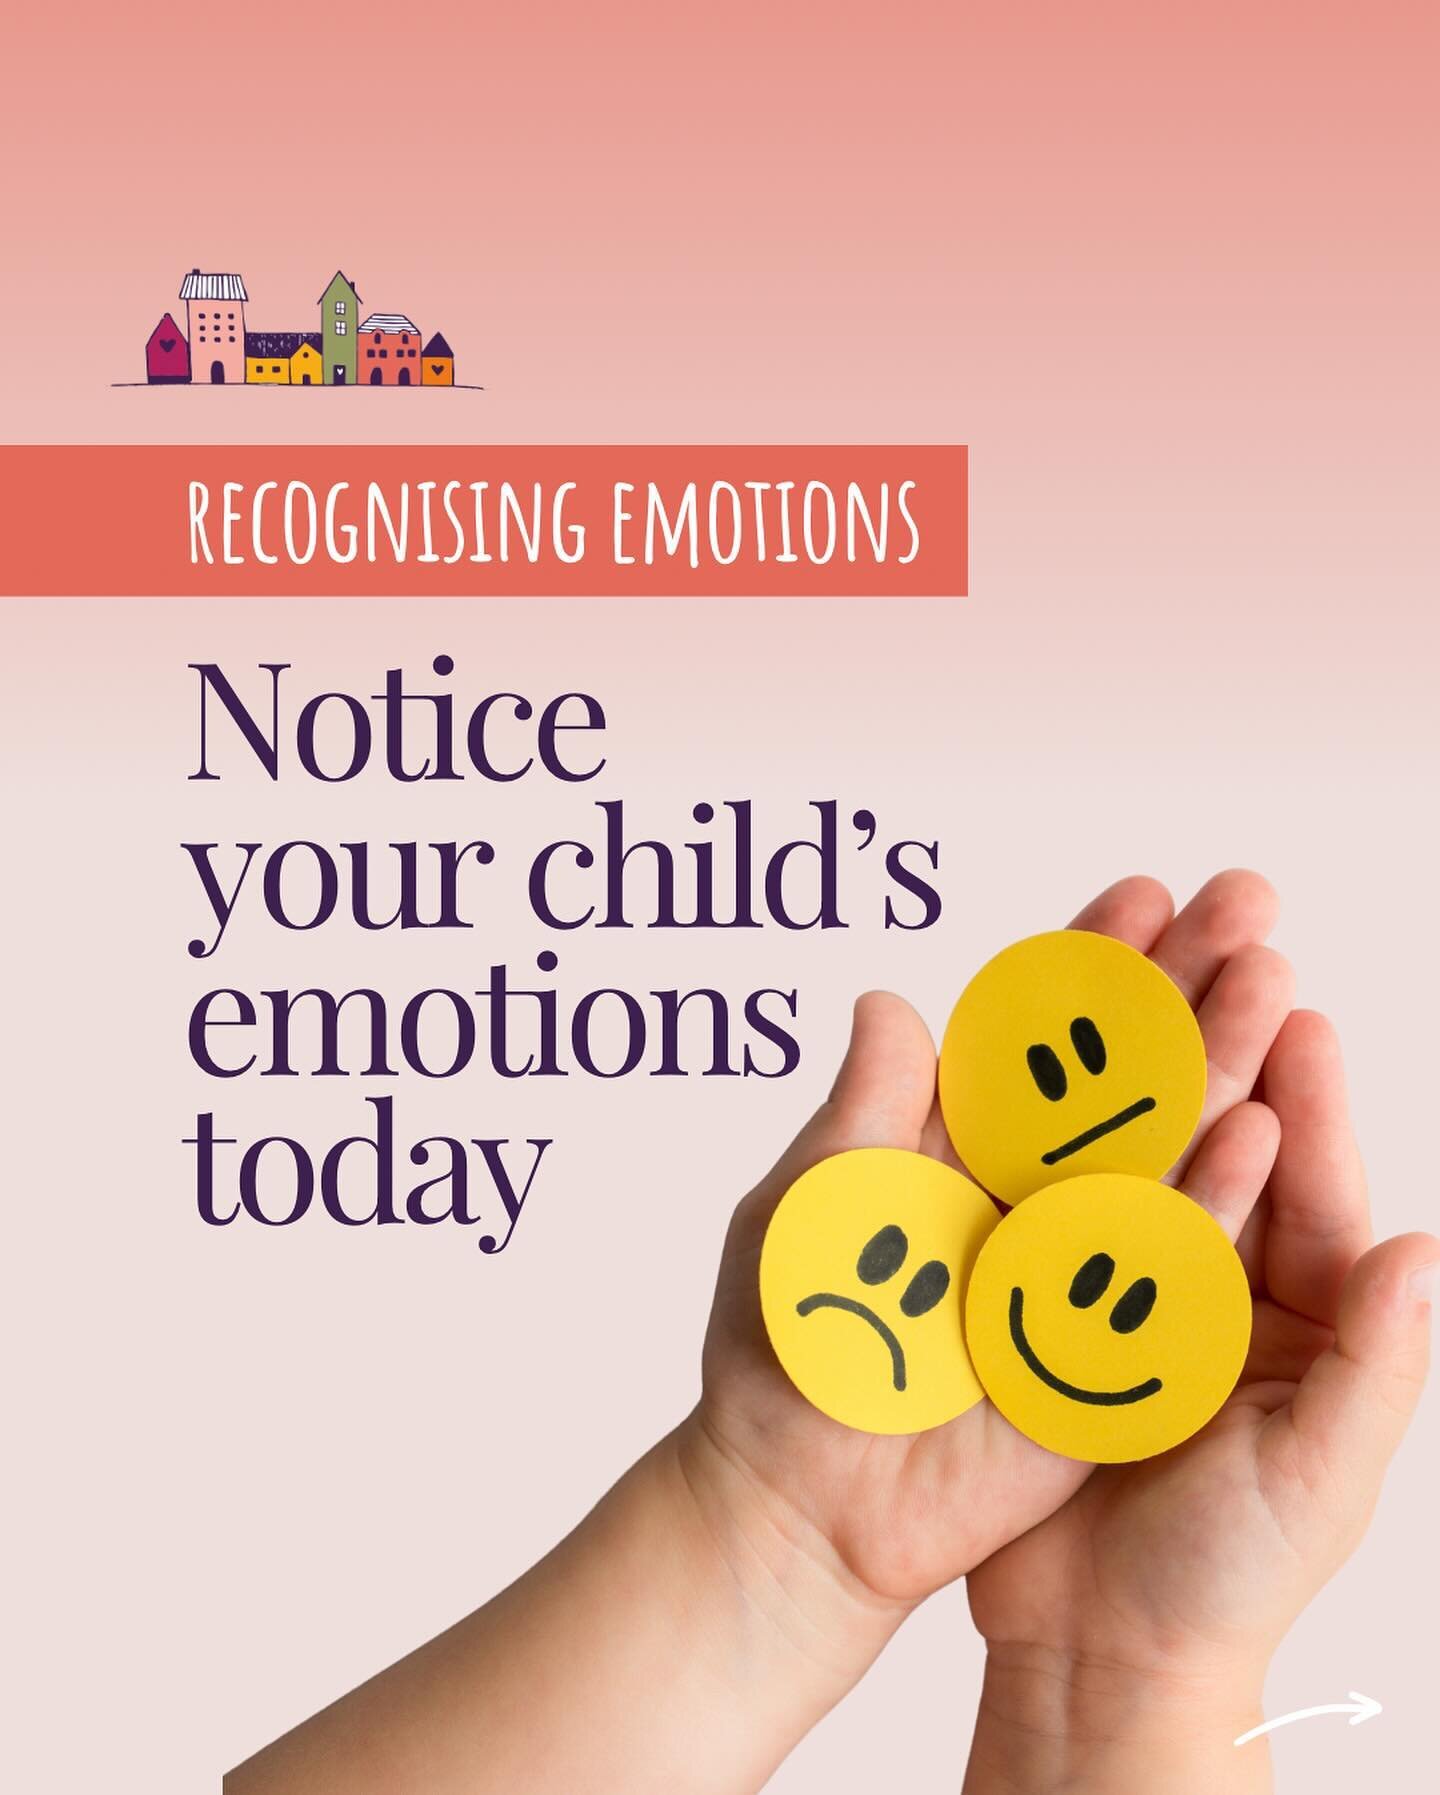 recognise and name your child&rsquo;s emotions. Use these feeling words to help them express animated excitement, cautious curiosity, or perhaps even vulnerable uncertainty. This simple yet powerful practice lays the foundation for emotional processi